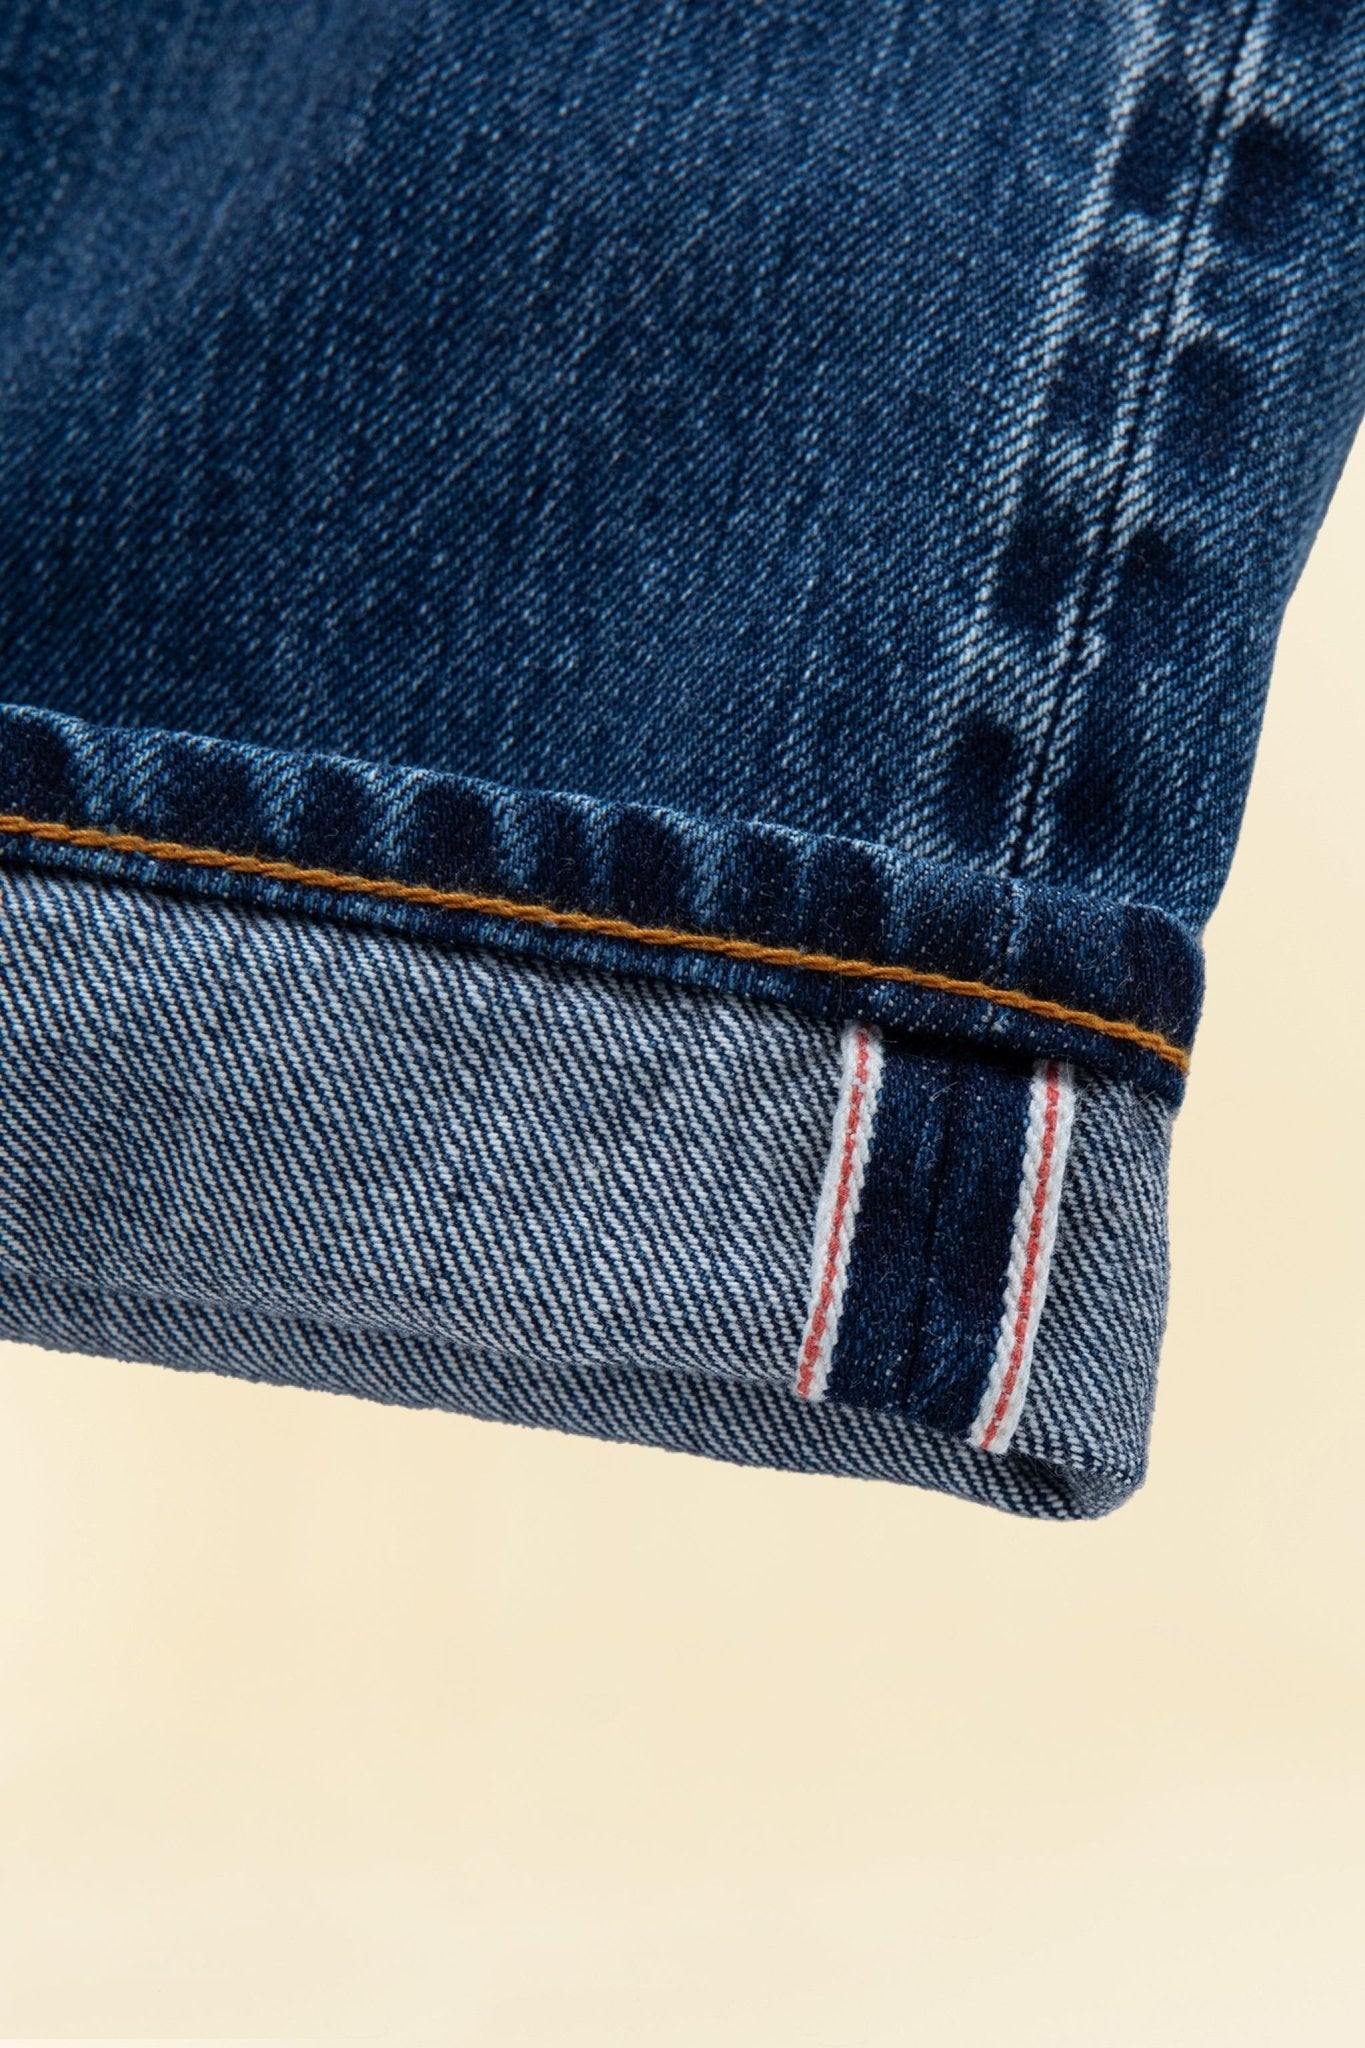 Rats SS23 13.5oz Washed Straight Tapered Selvedge Denim -Rats - URAHARA